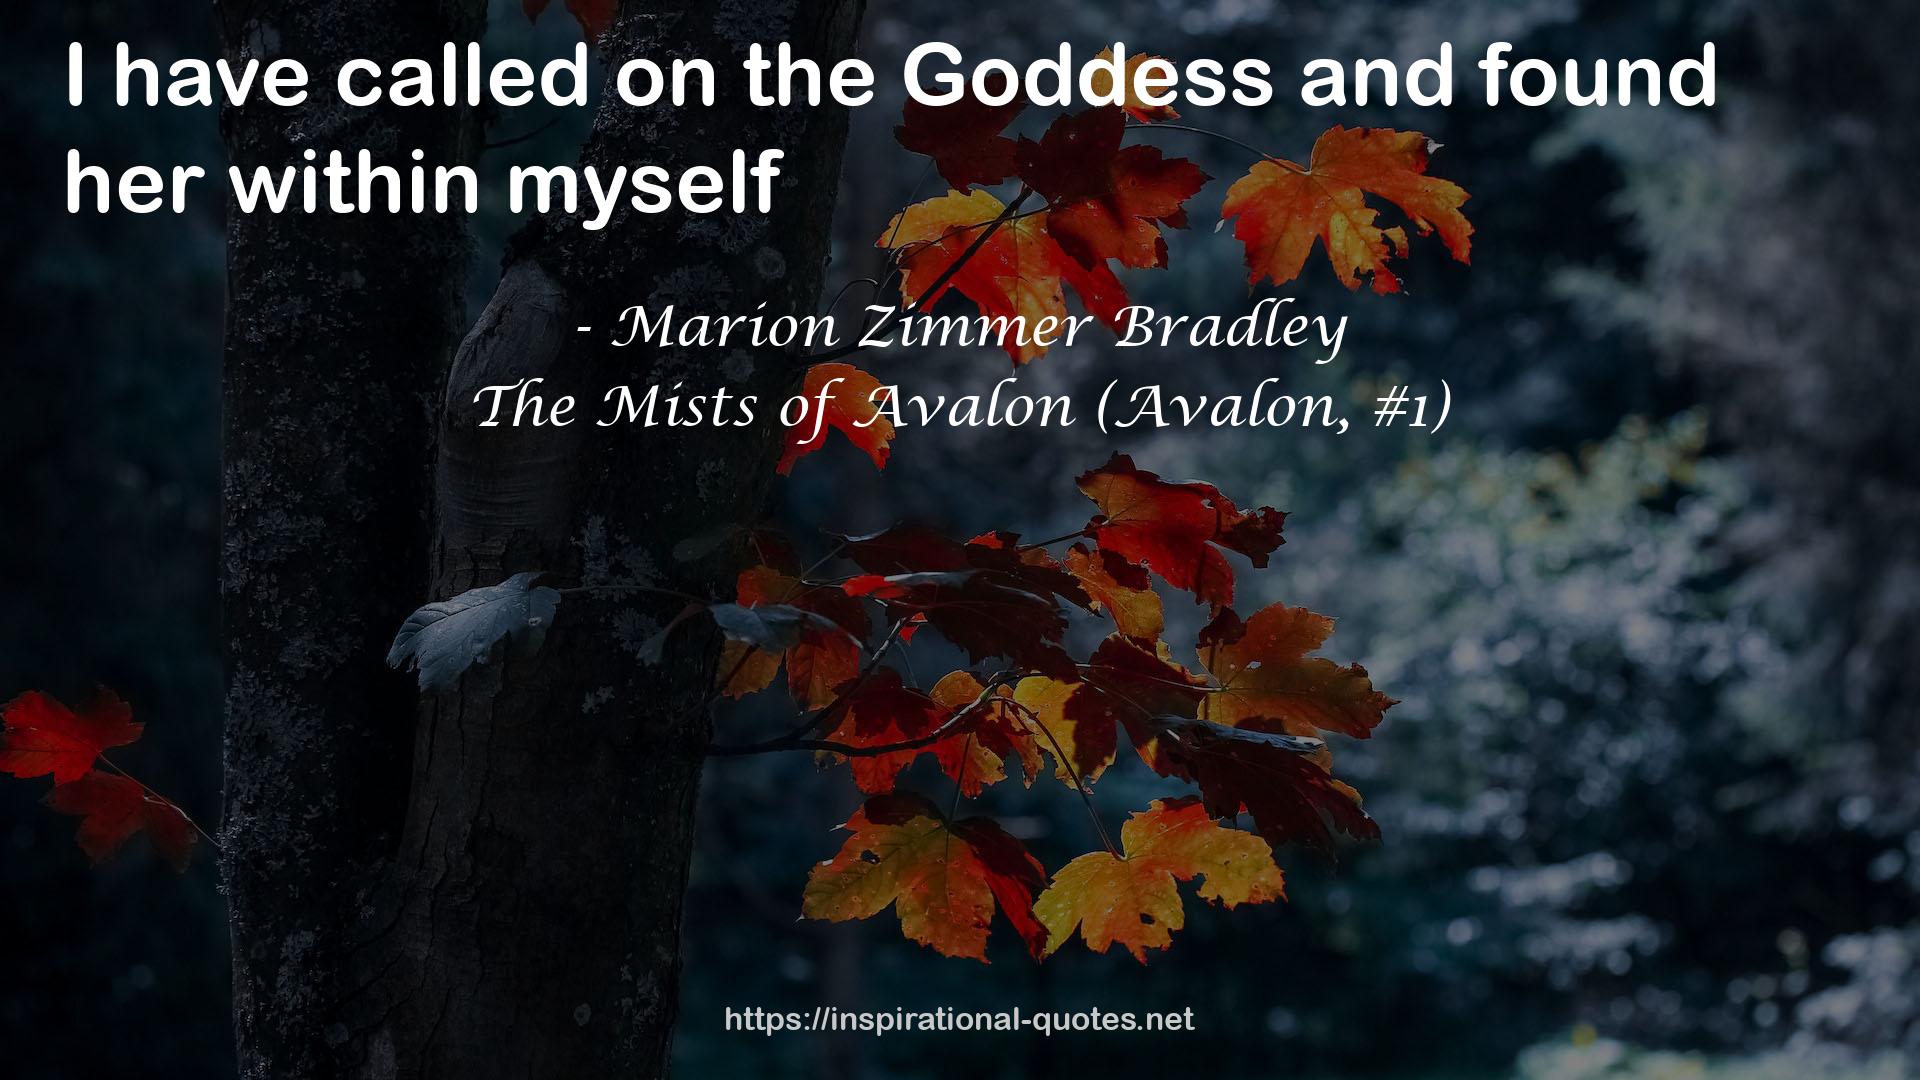 The Mists of Avalon (Avalon, #1) QUOTES